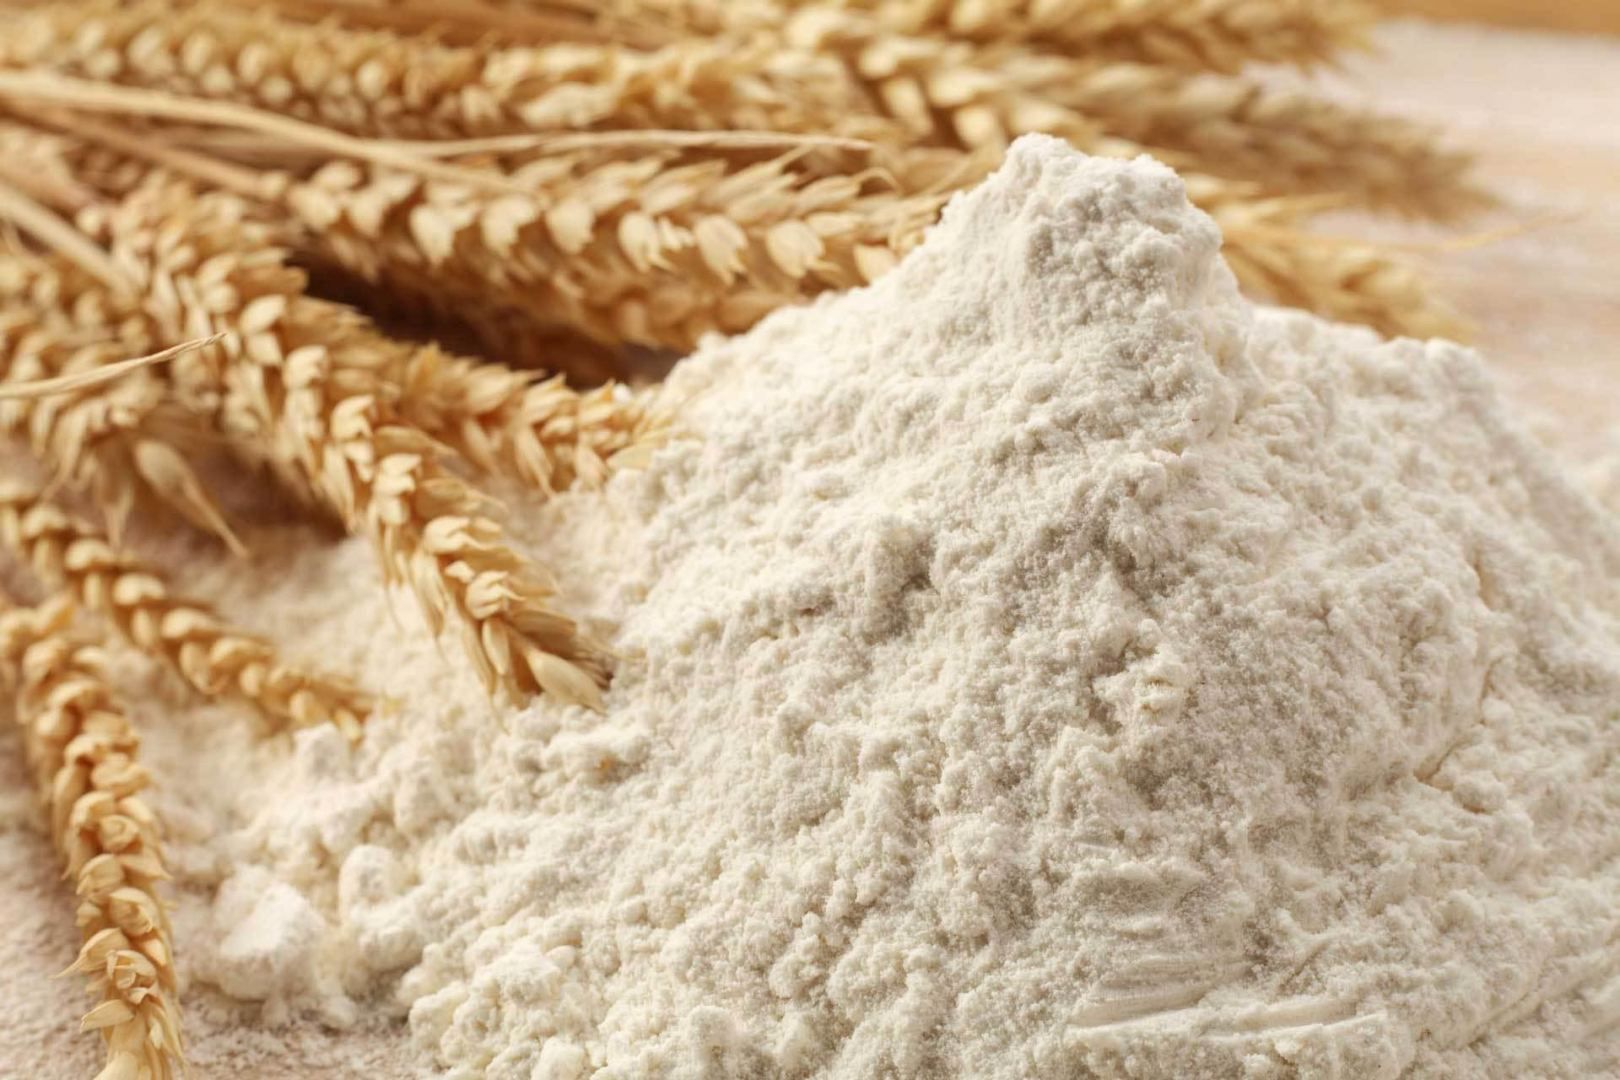 Global market on verge of acute shortage of grain - flour prices rapidly increase